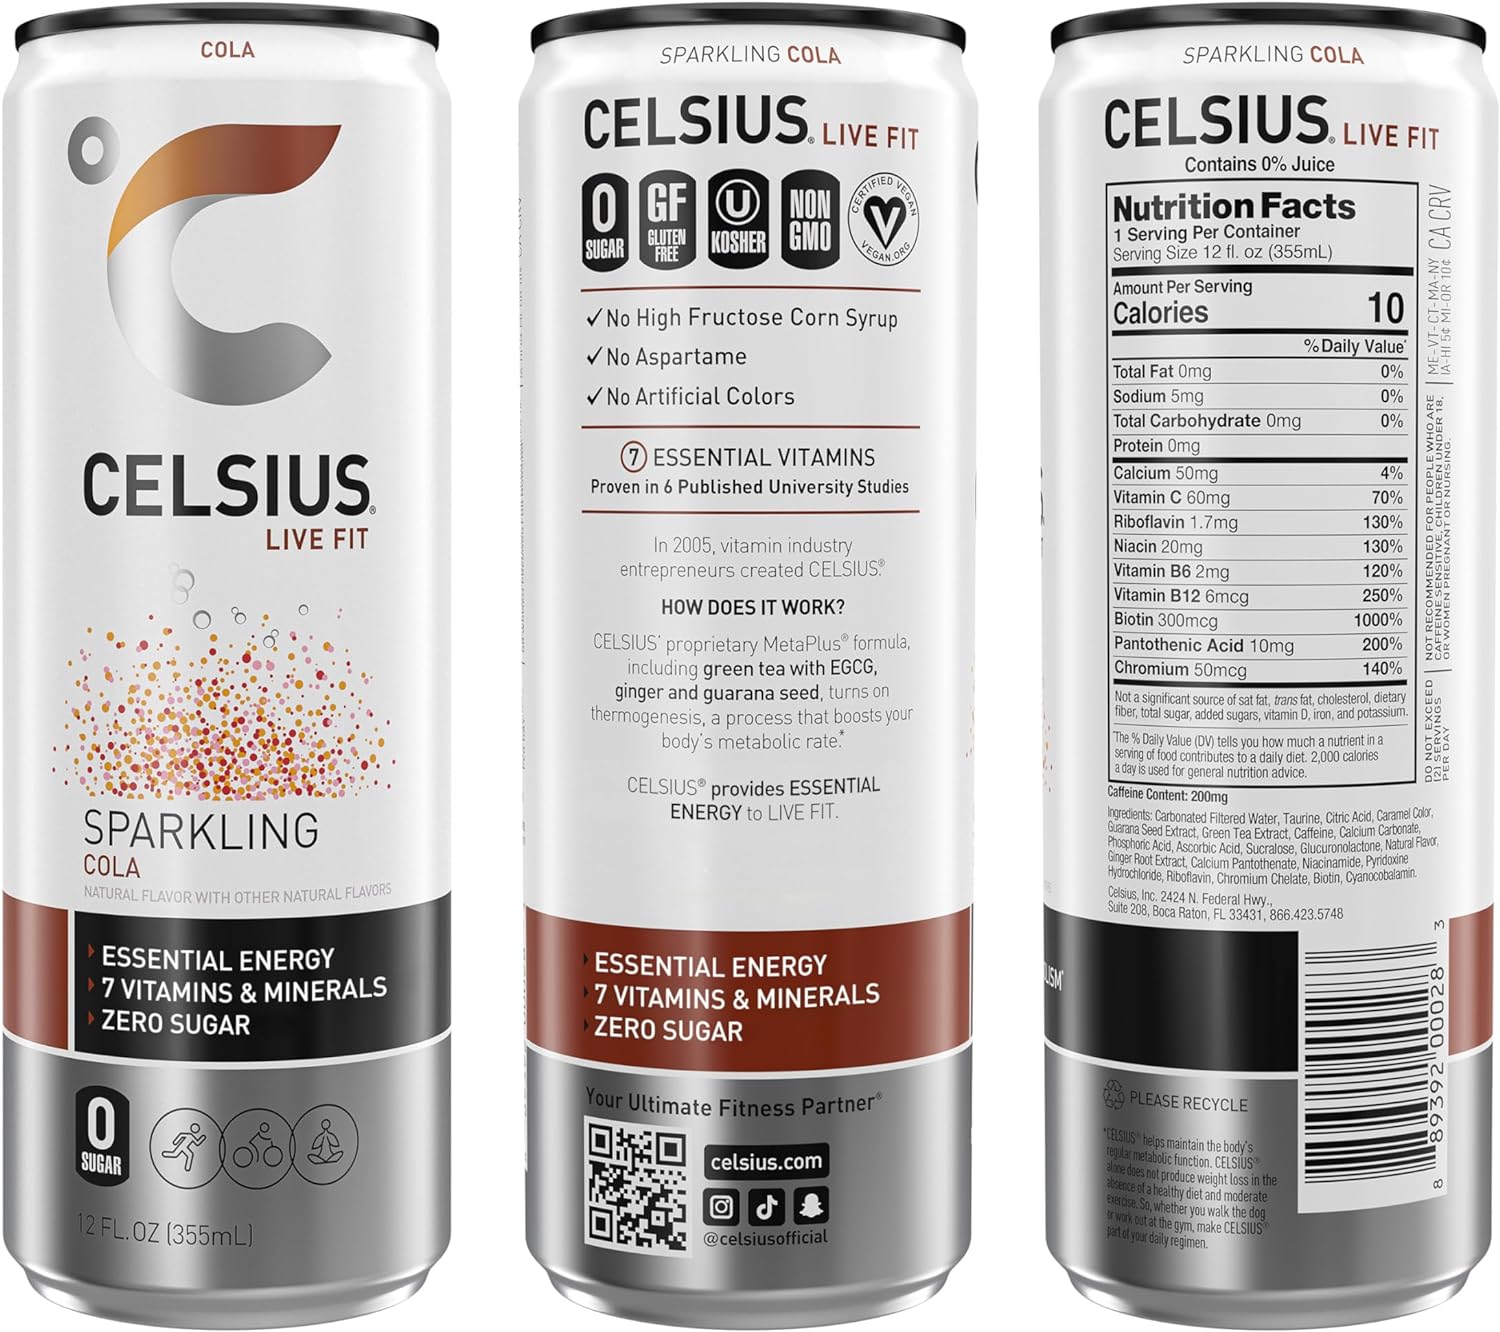 Celsius Fitness Drink, Peach Vibe - 355Ml (Pack Of 12)